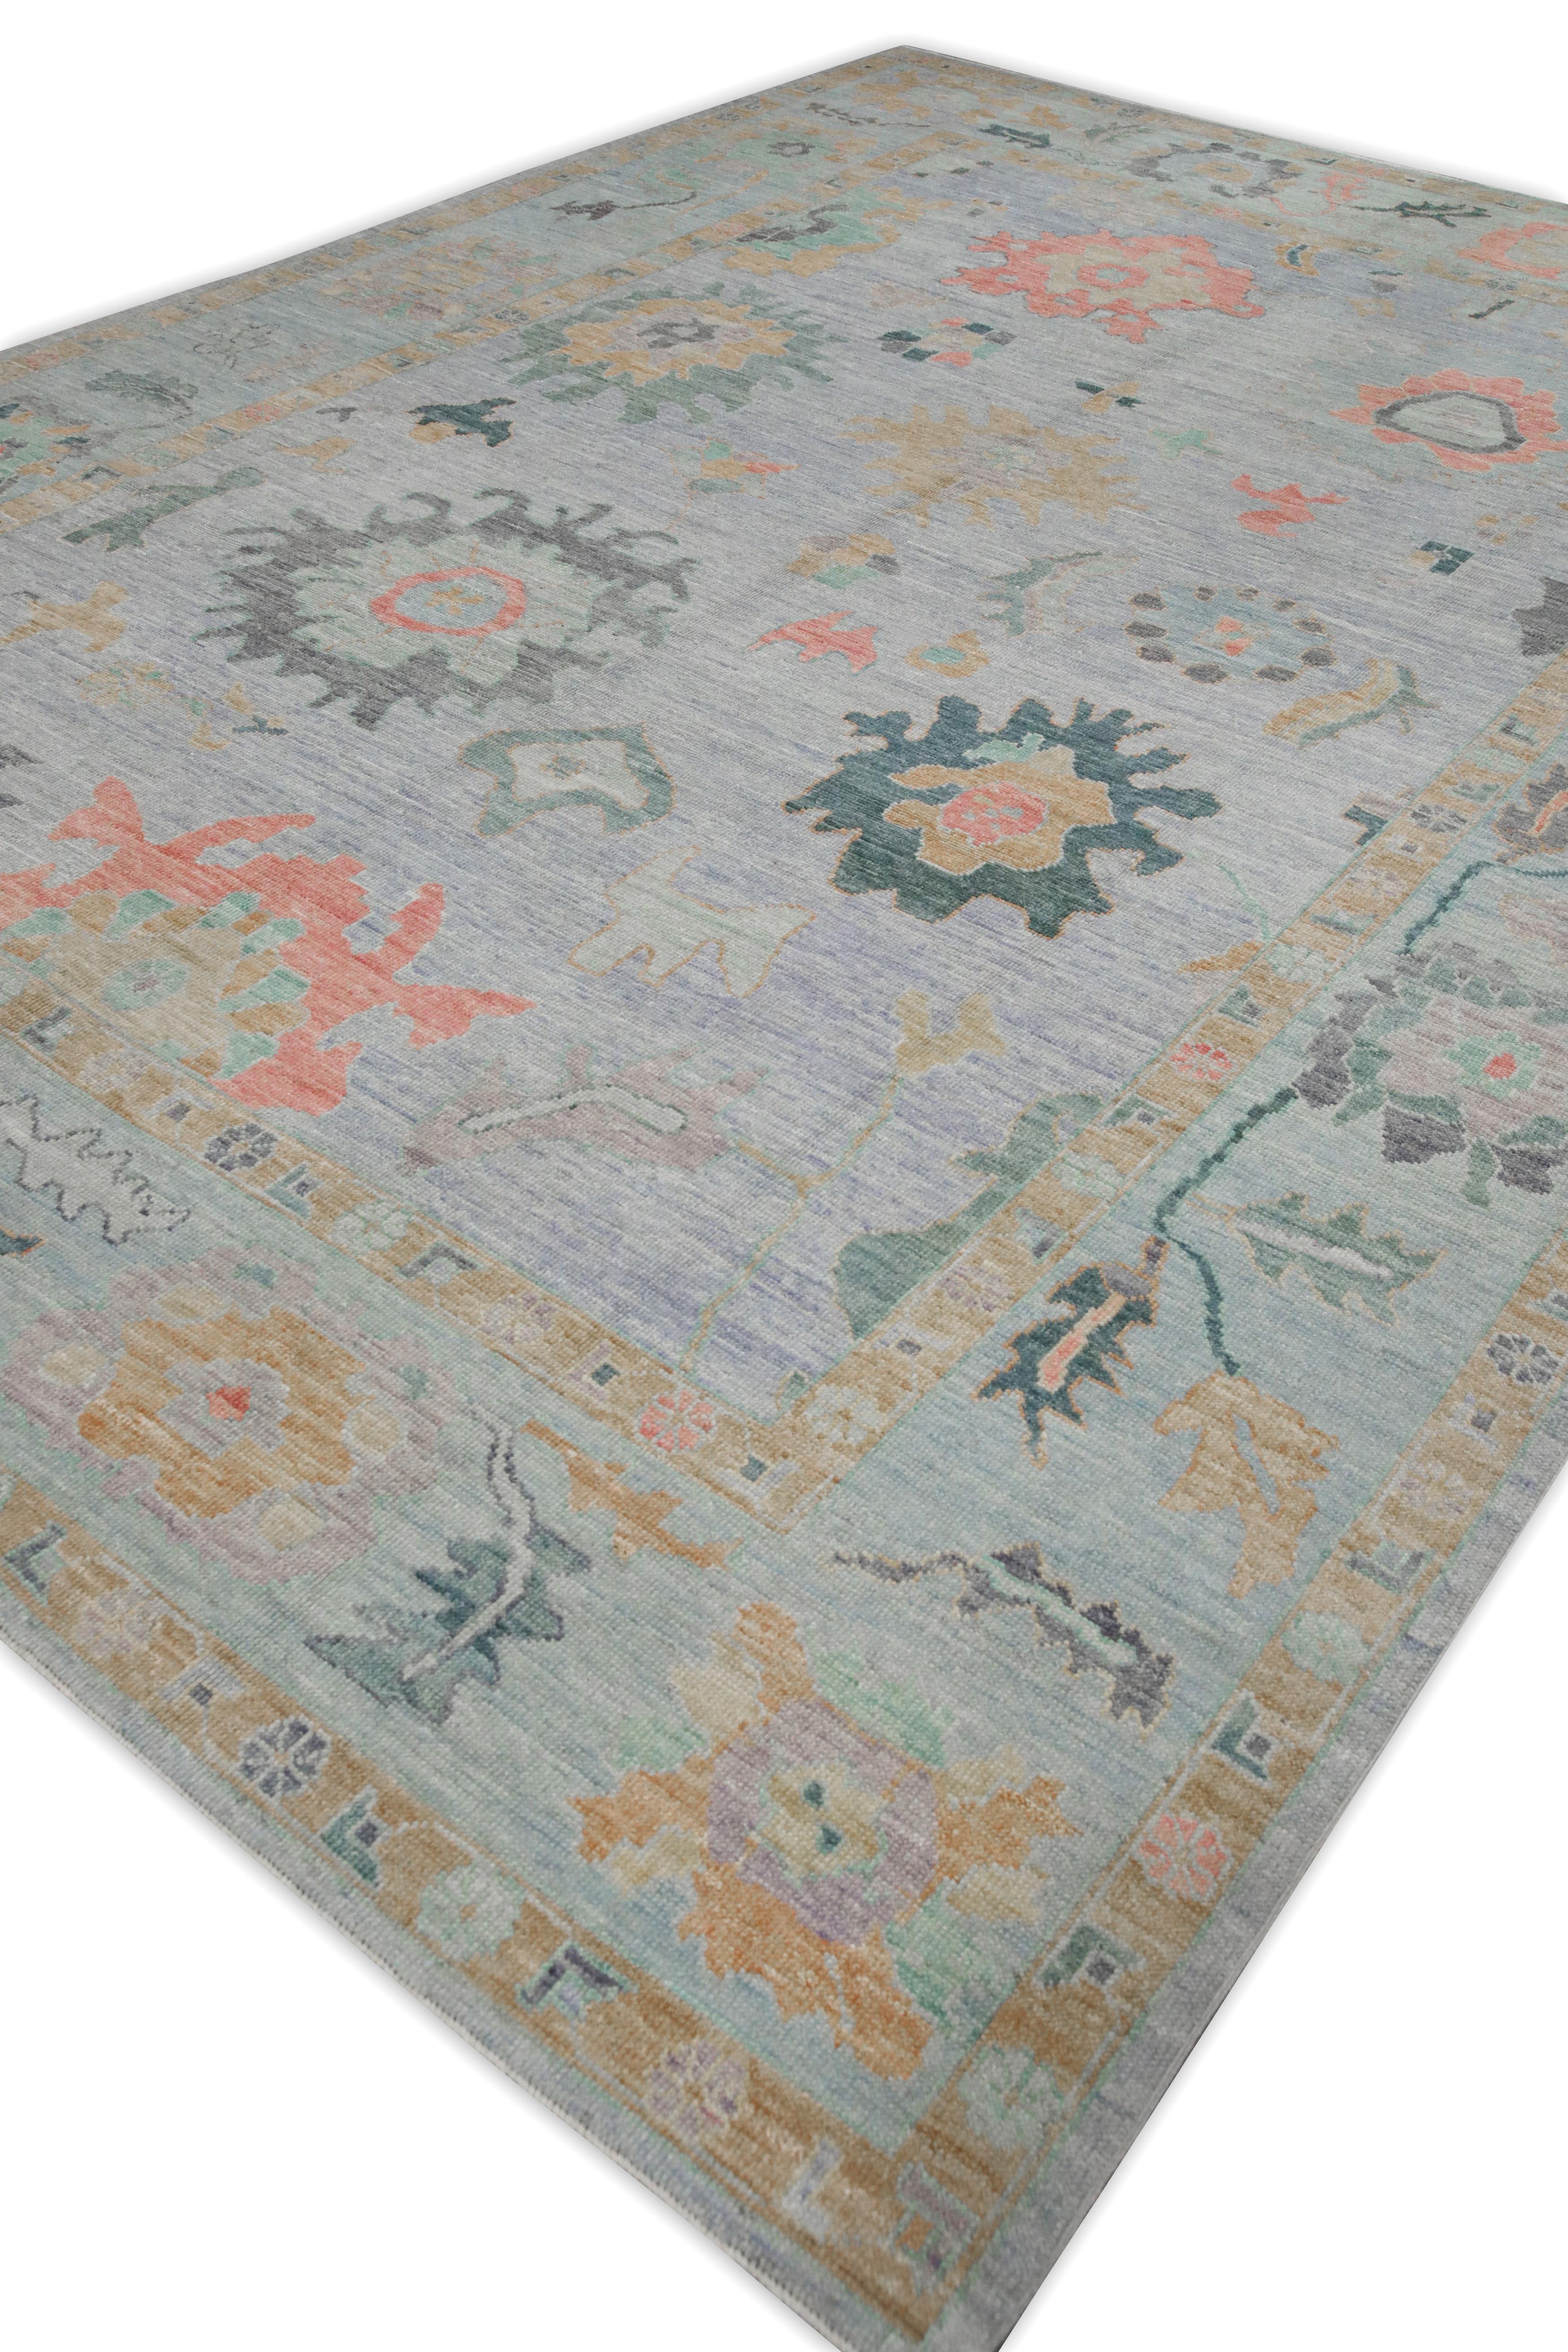 Contemporary Blue Multicolor Floral Design Handwoven Wool Turkish Oushak Rug 10'4